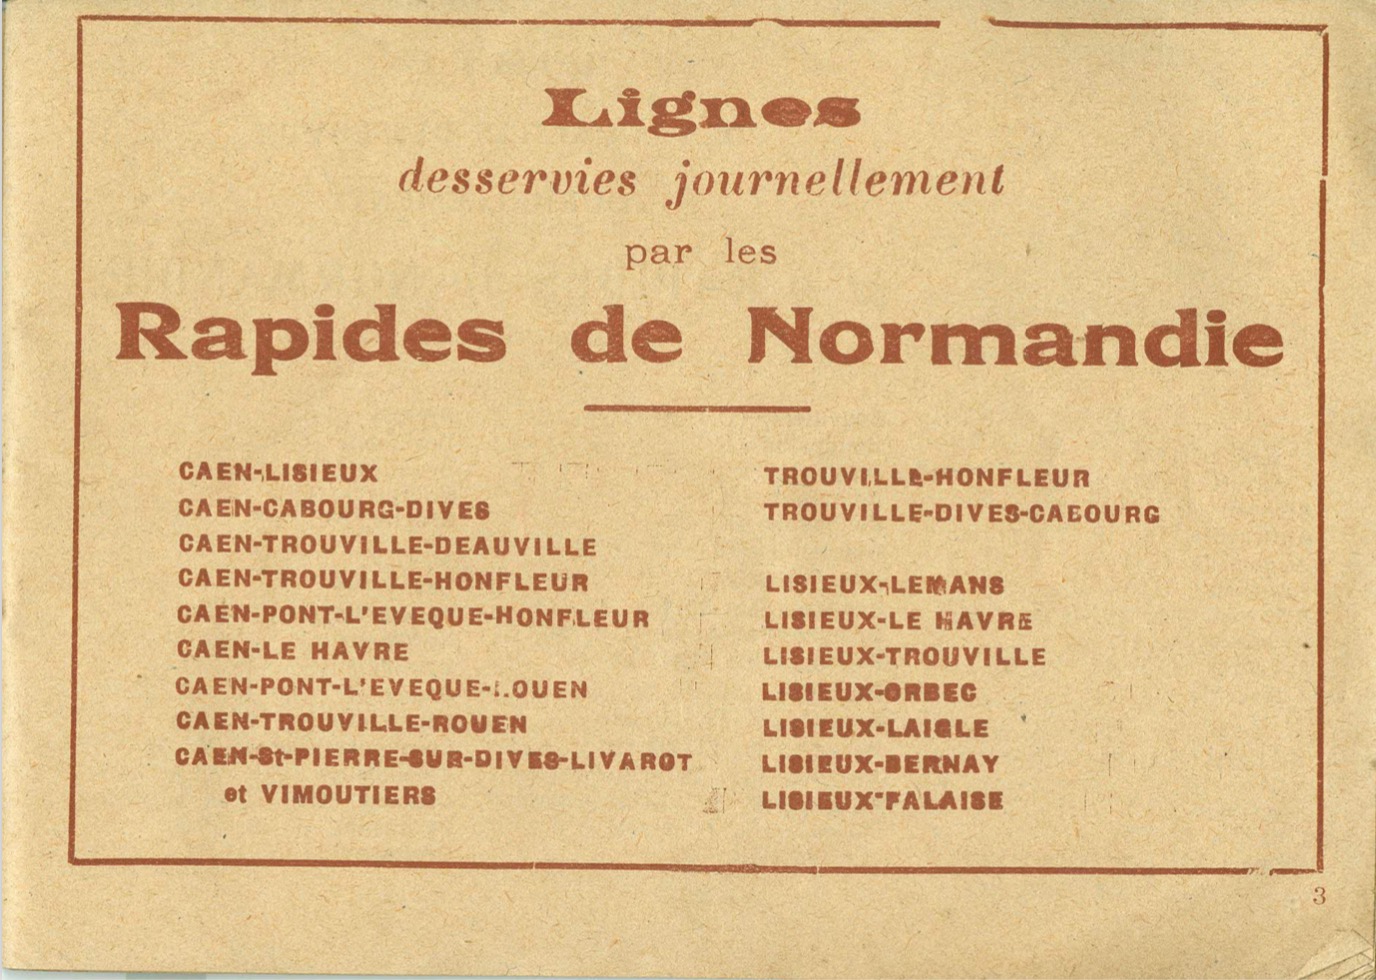 list of routes from 1934 timetable